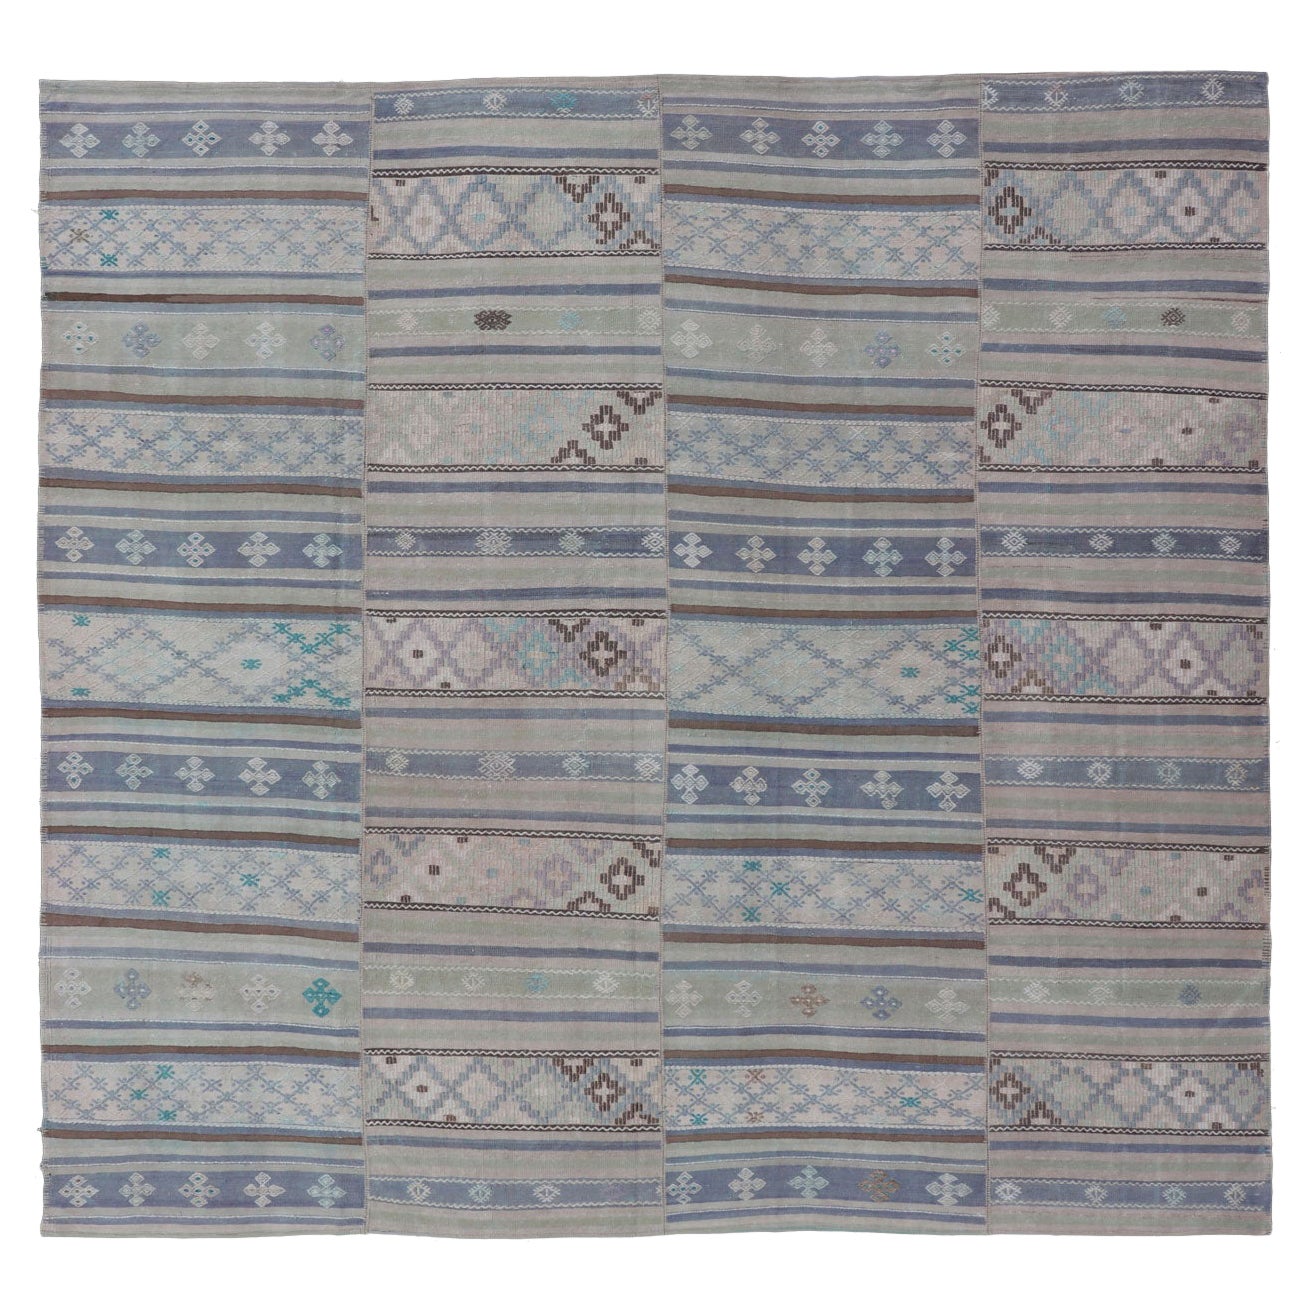 Square Vintage Neutral Paneled Kilim Flat-Weave in Neutral Muted Tones 